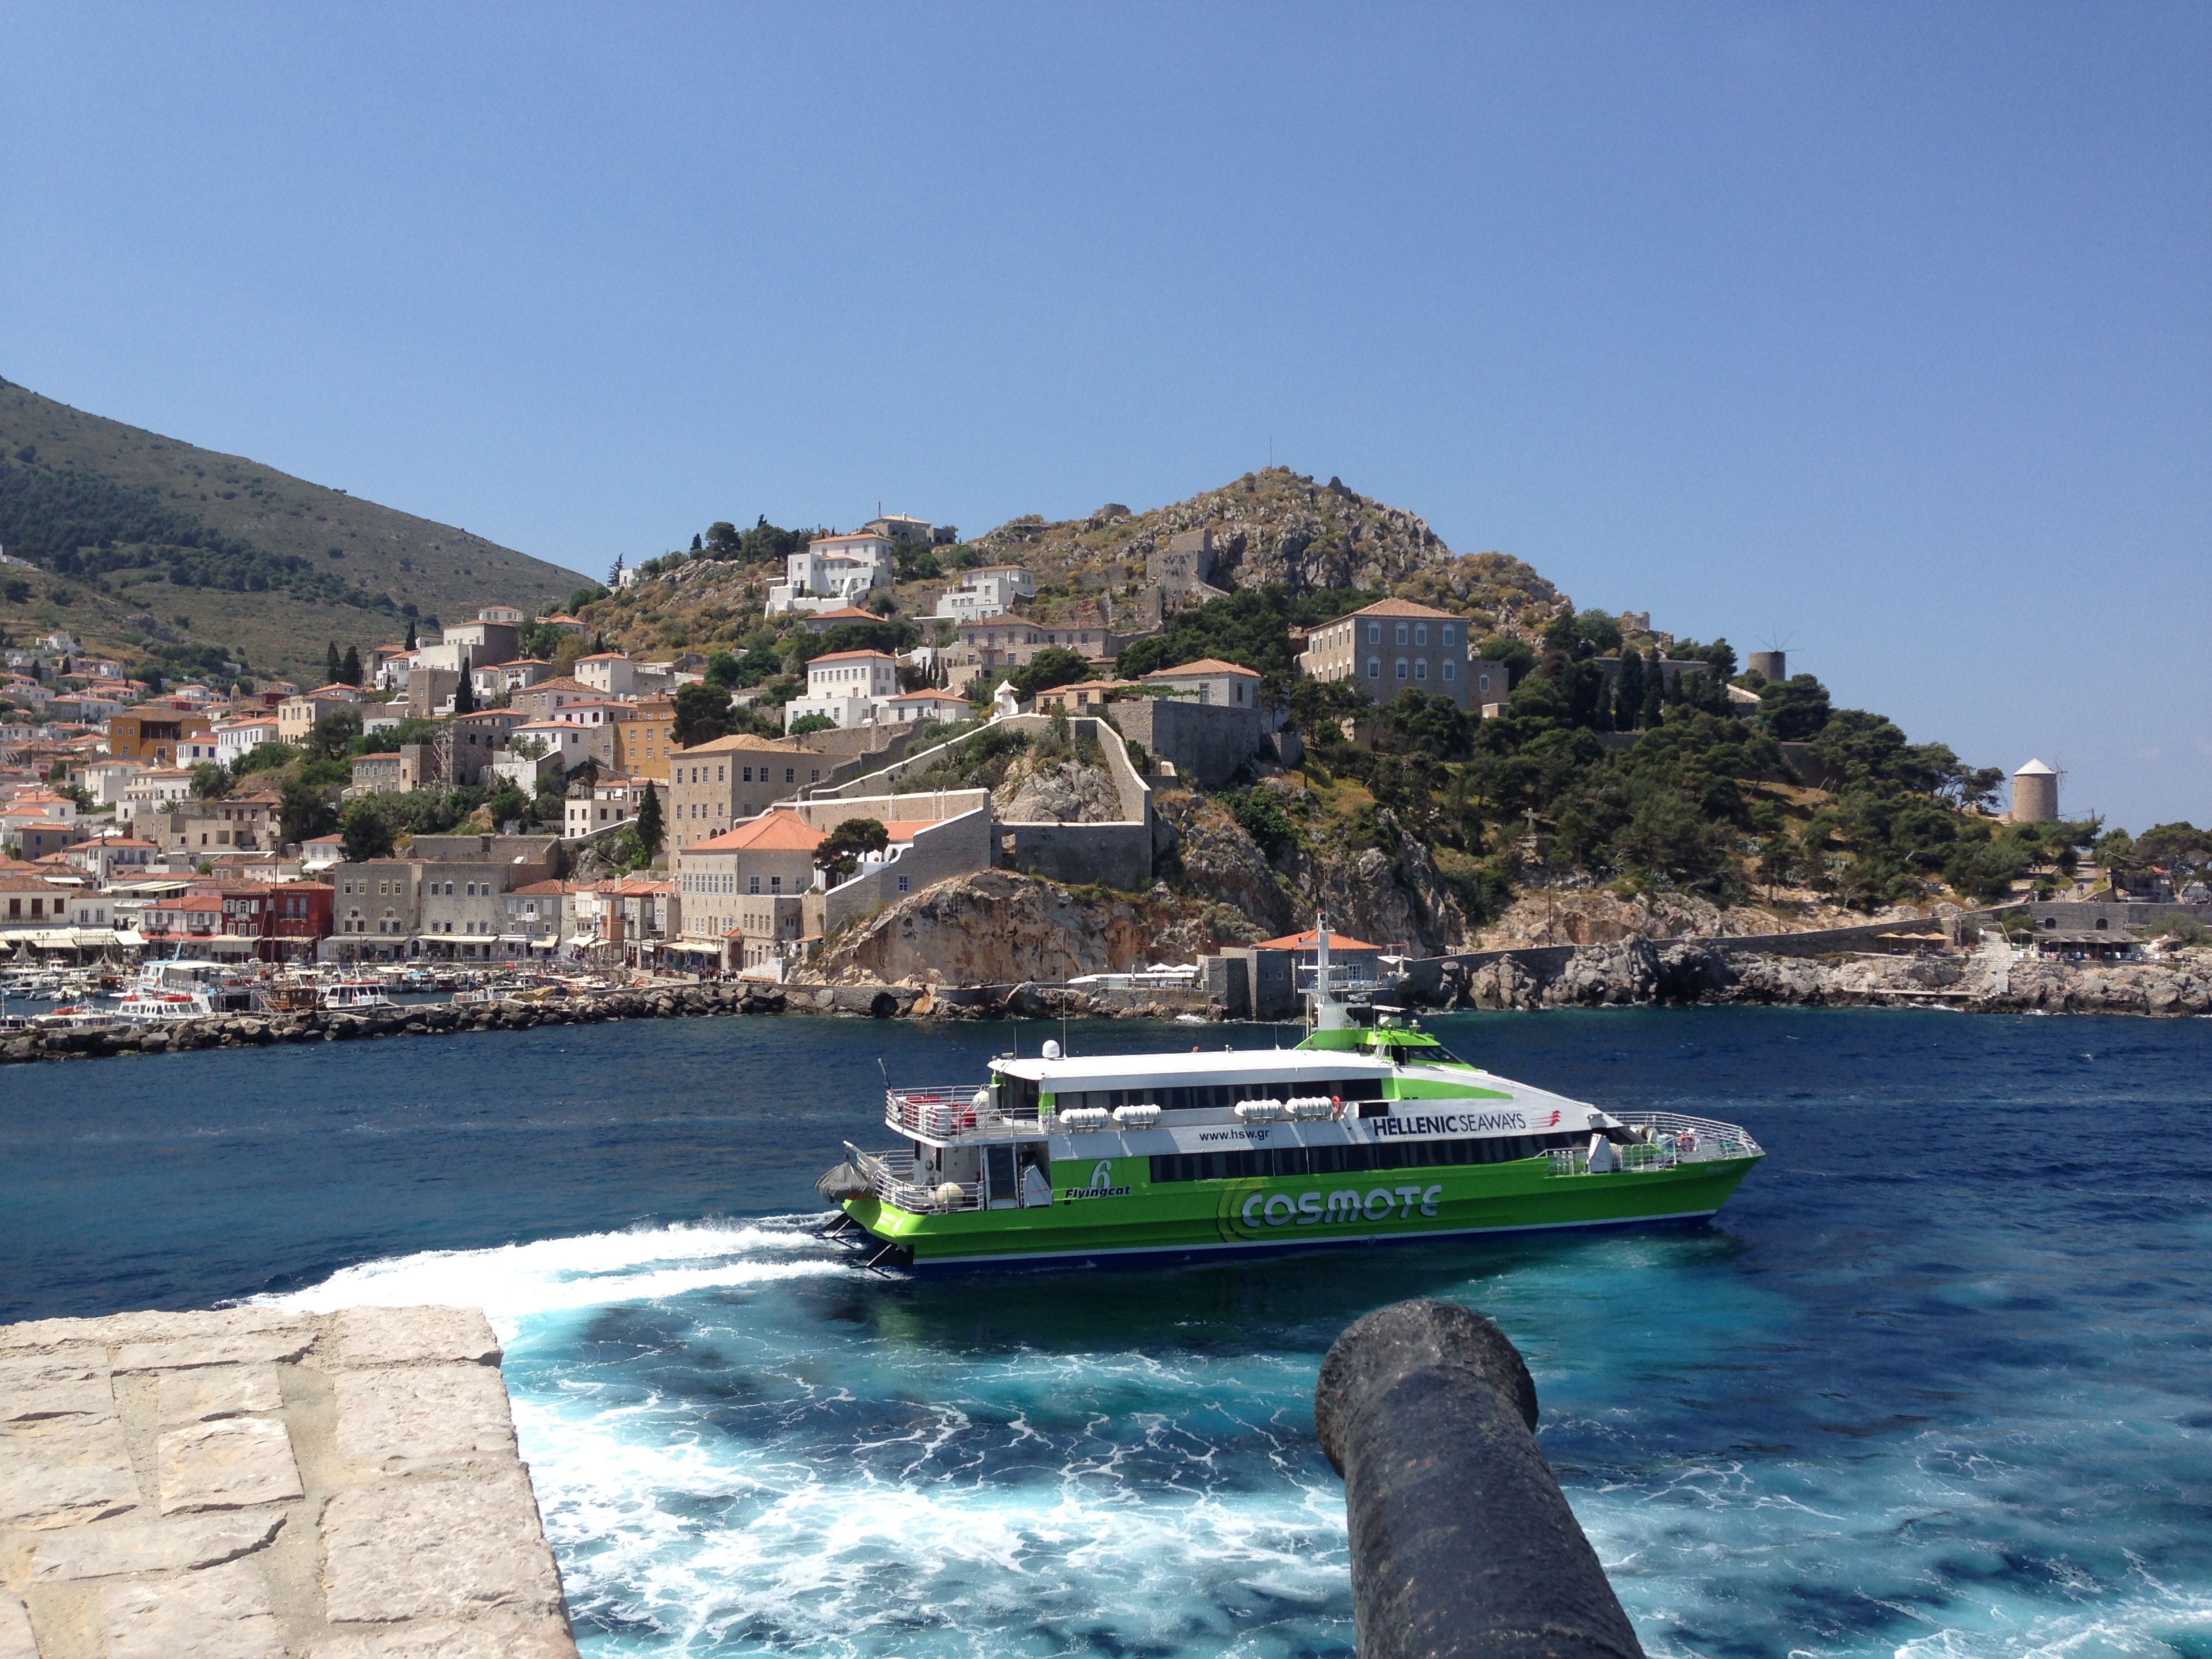 The Flying Dolphin leaving the Port of Hydra Photo by Francesca Muir